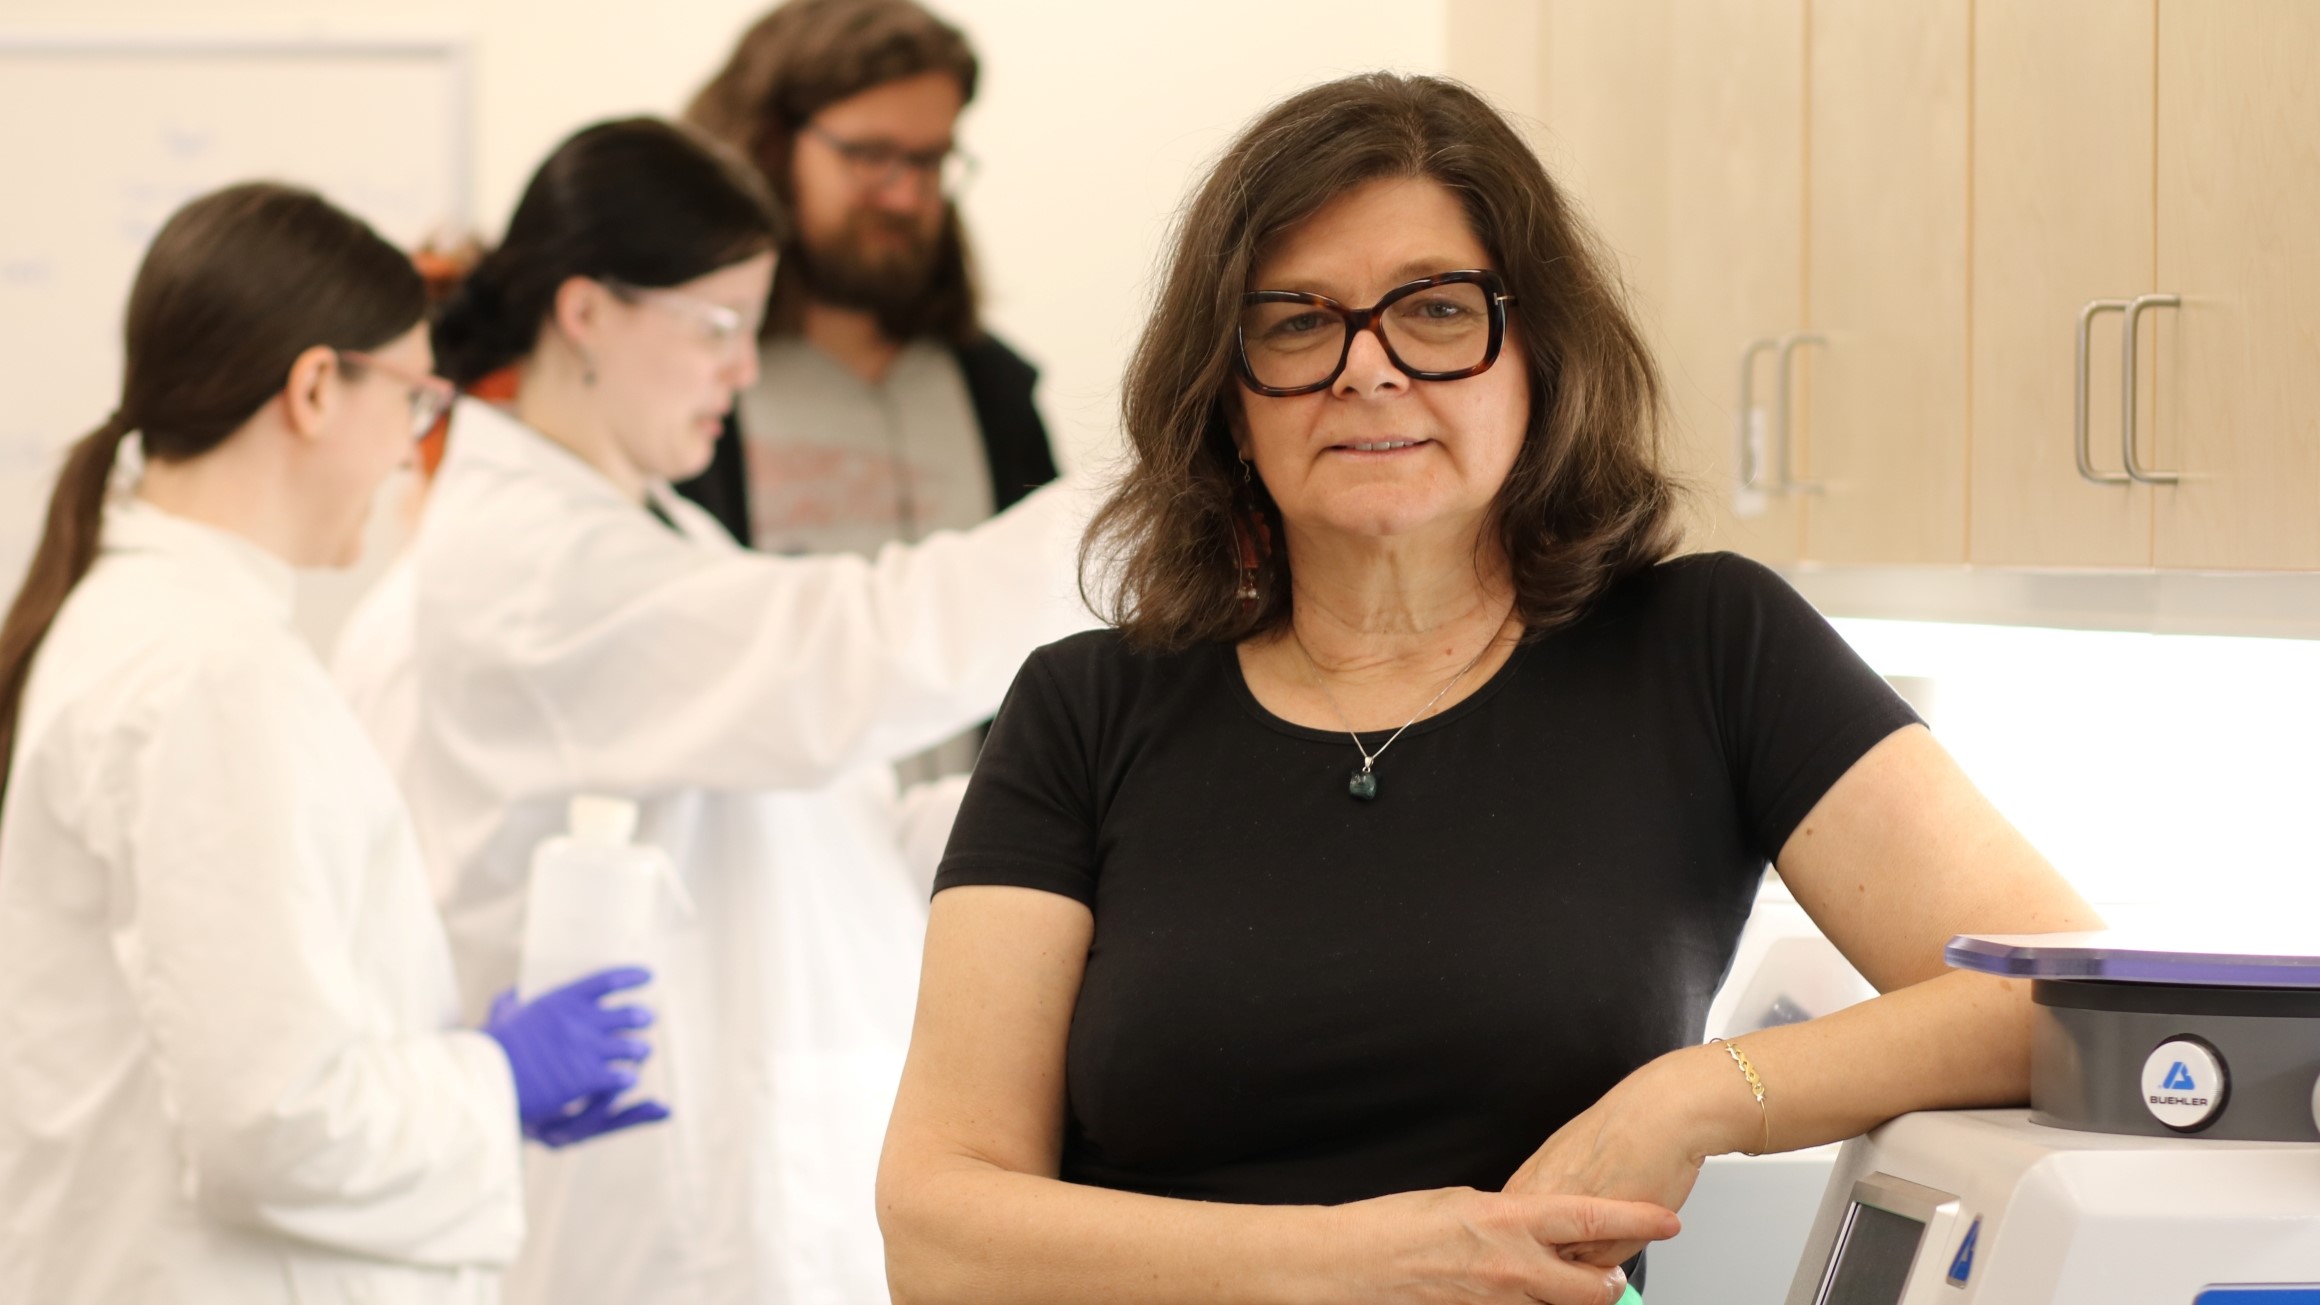 Dr. Mirjanda Roksandic in a lab with students working in the background.